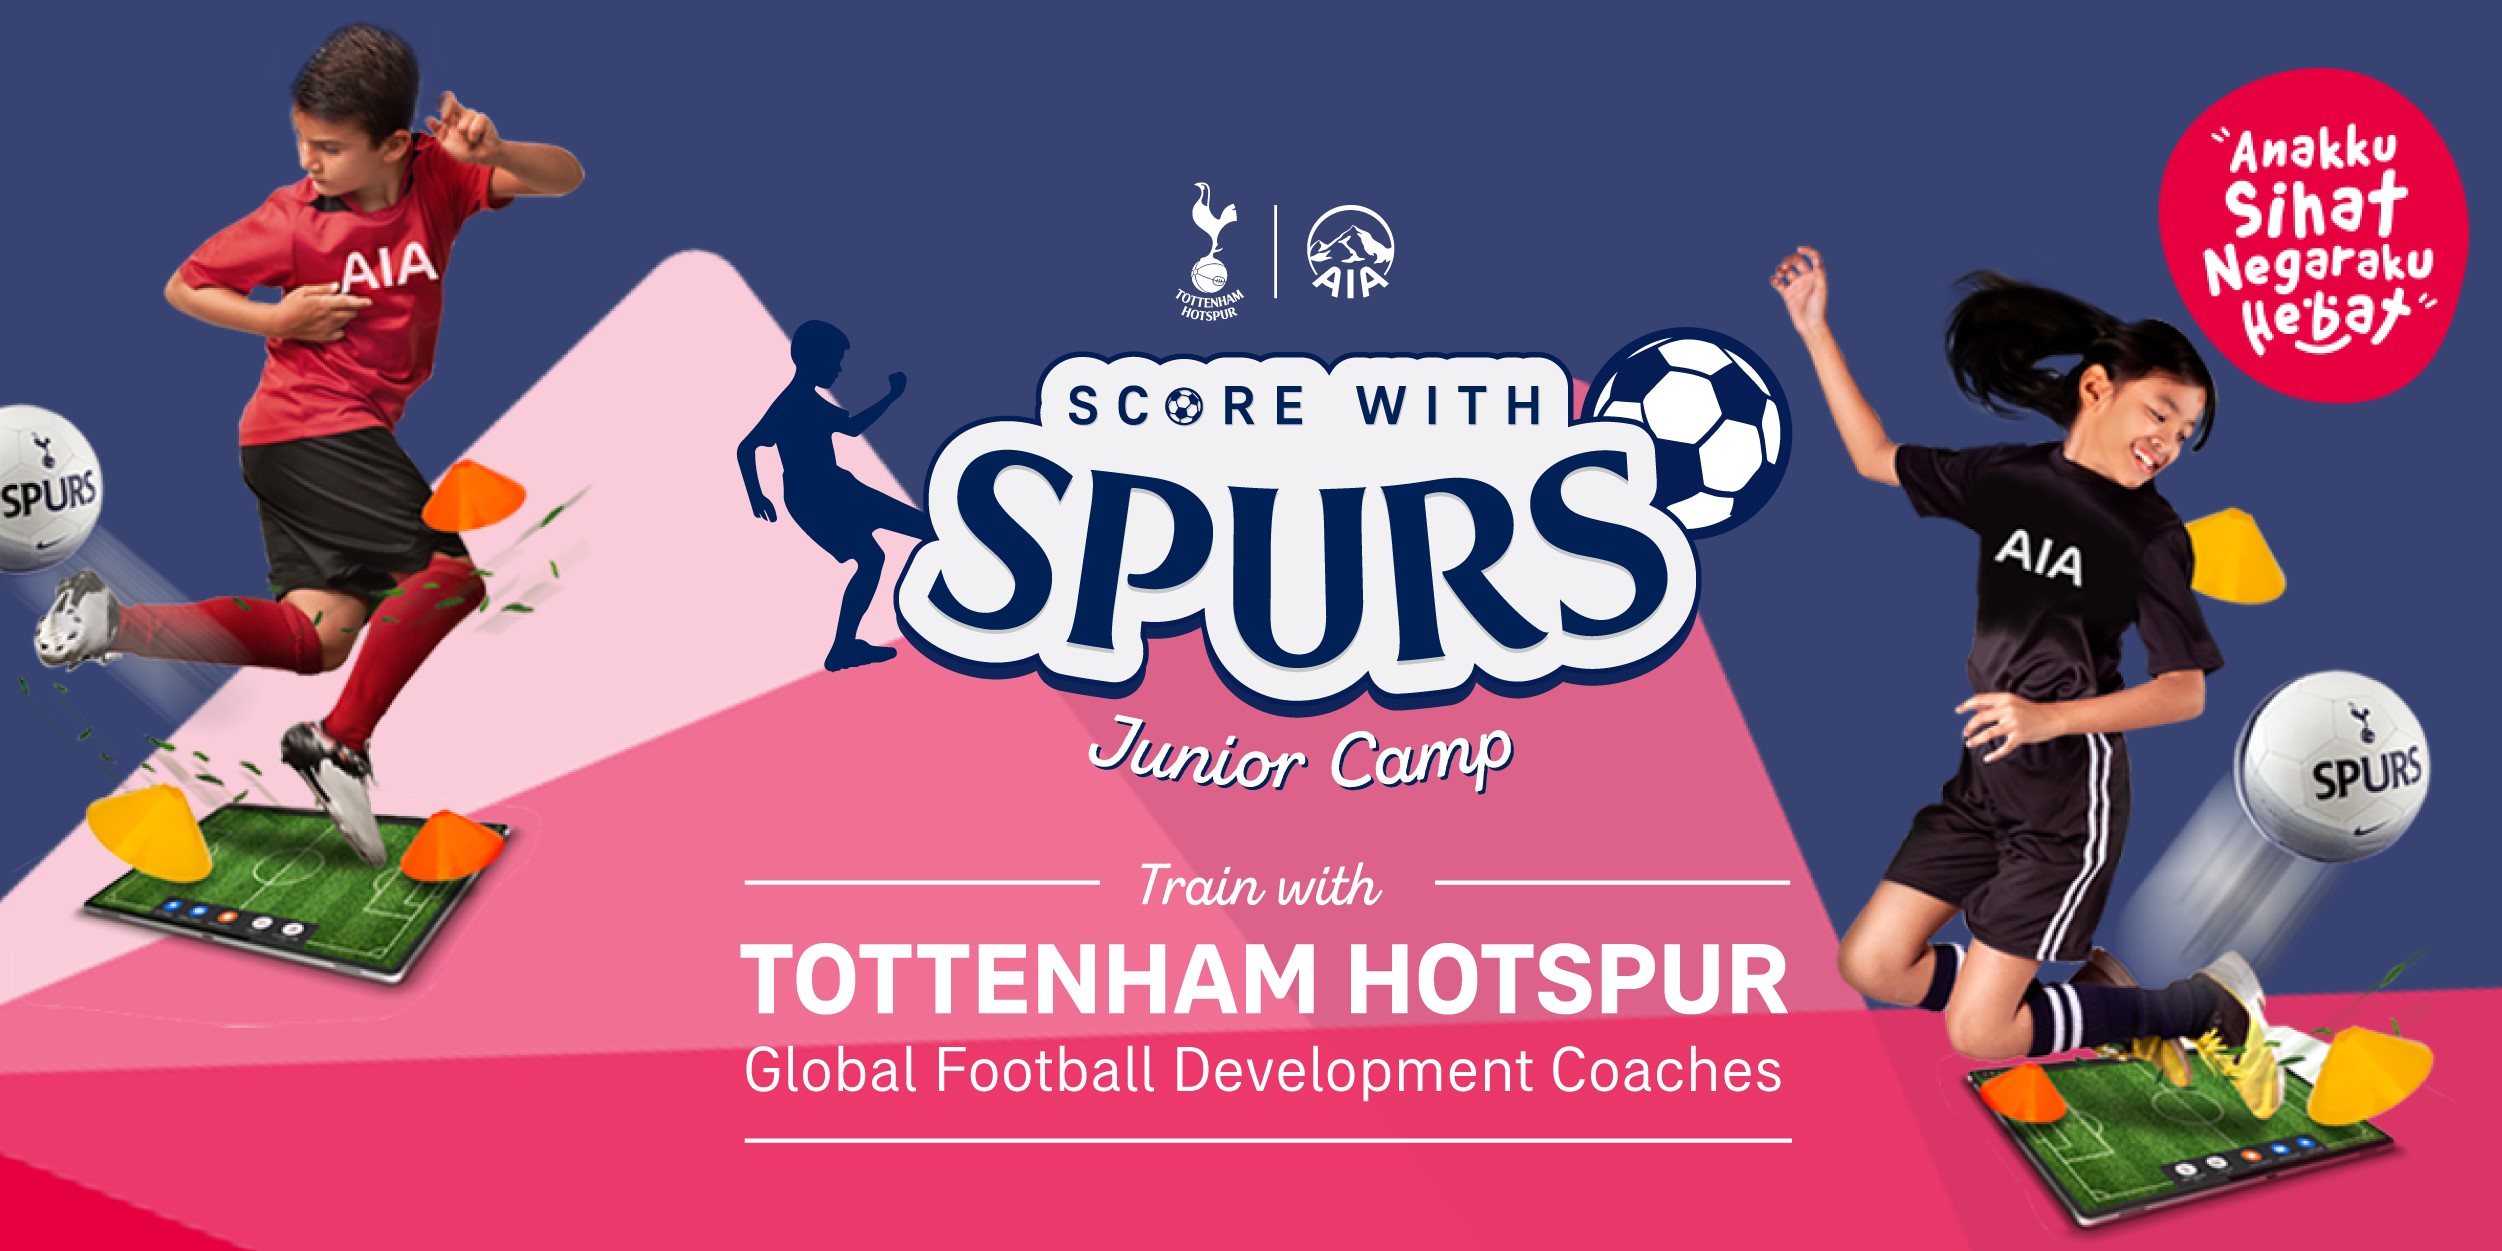 Score with spurs Junior